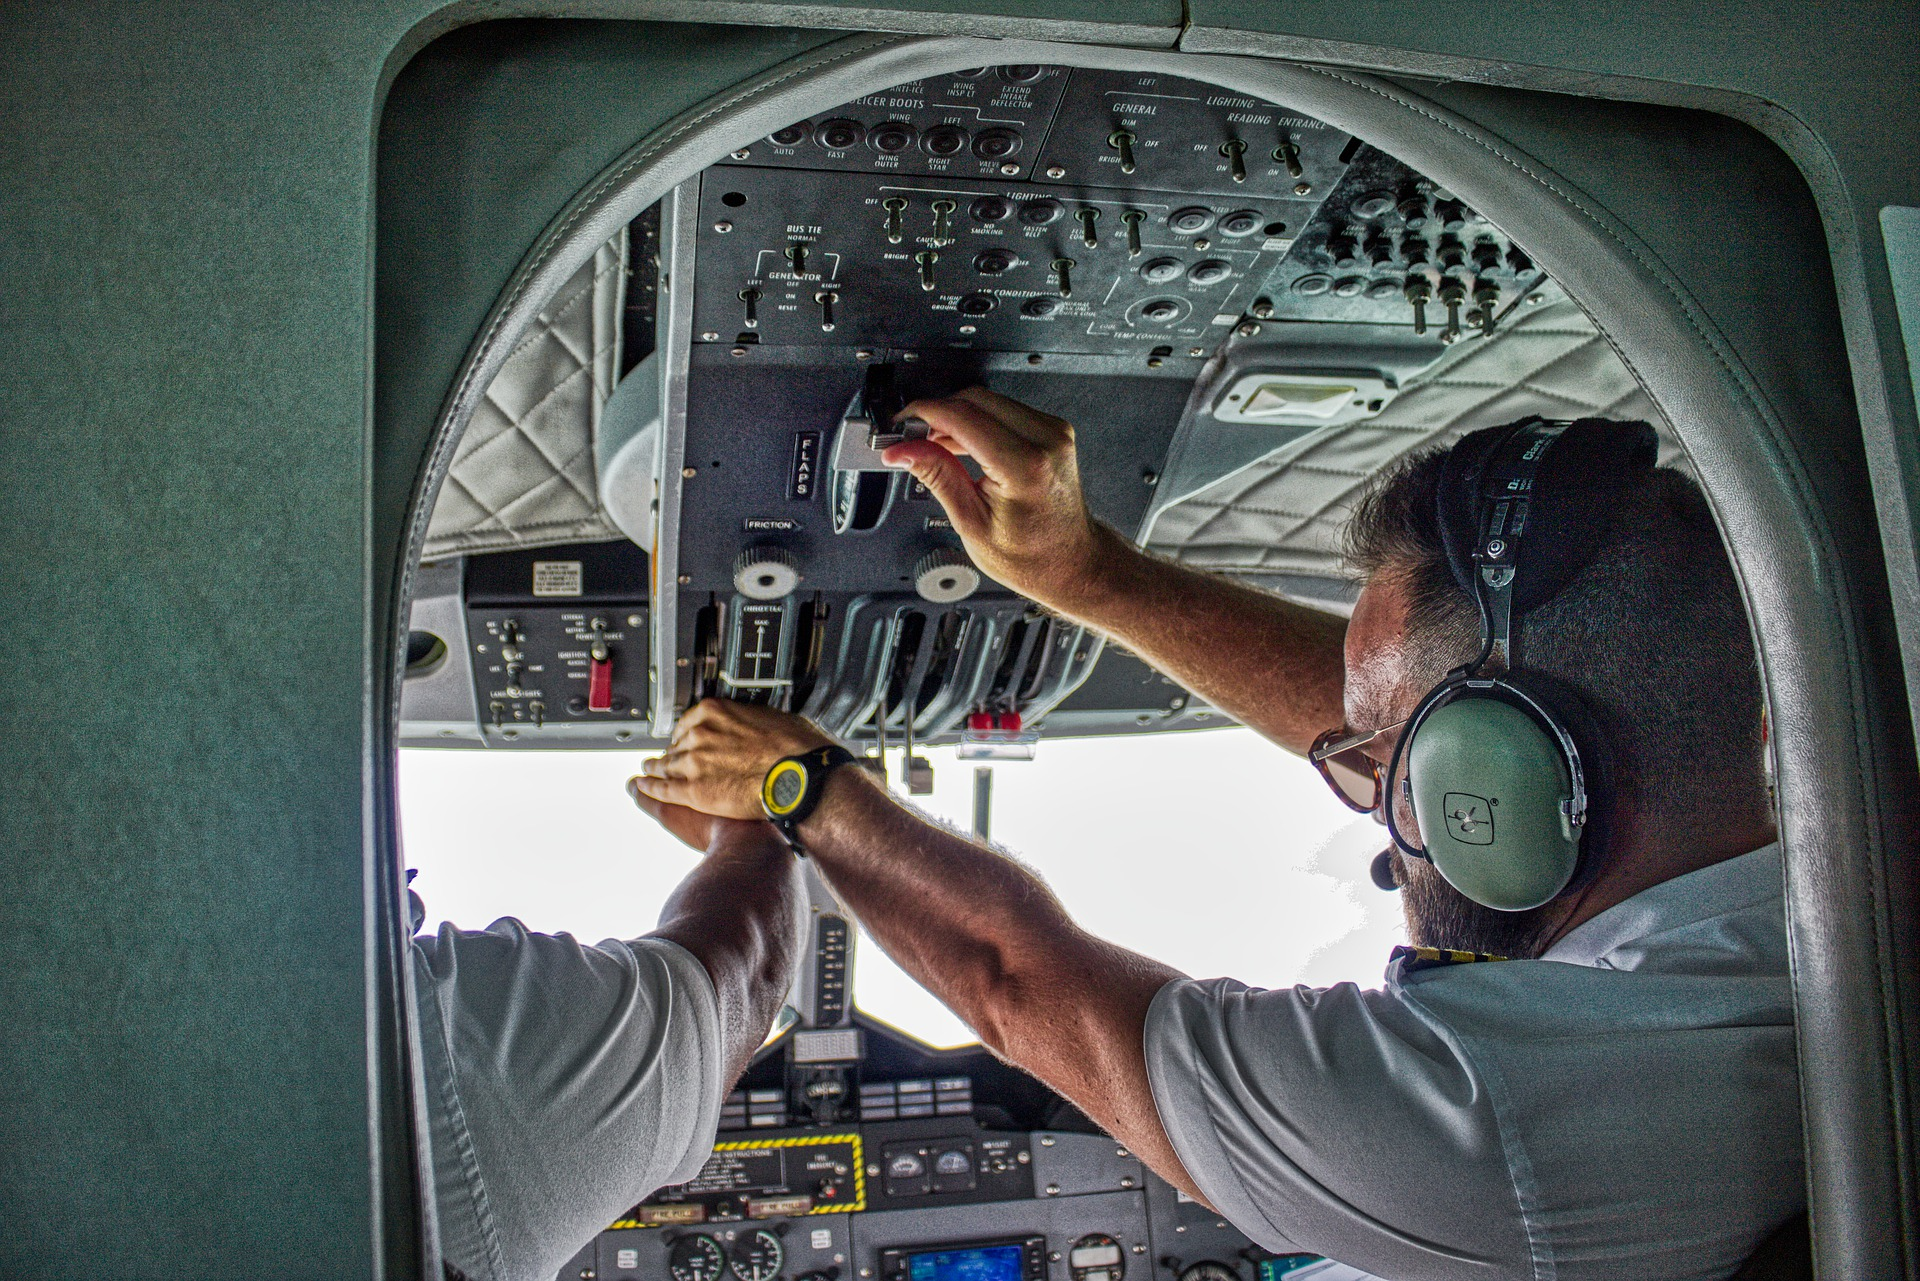 A pilot student being taught by the instructor how to use aircraft controls